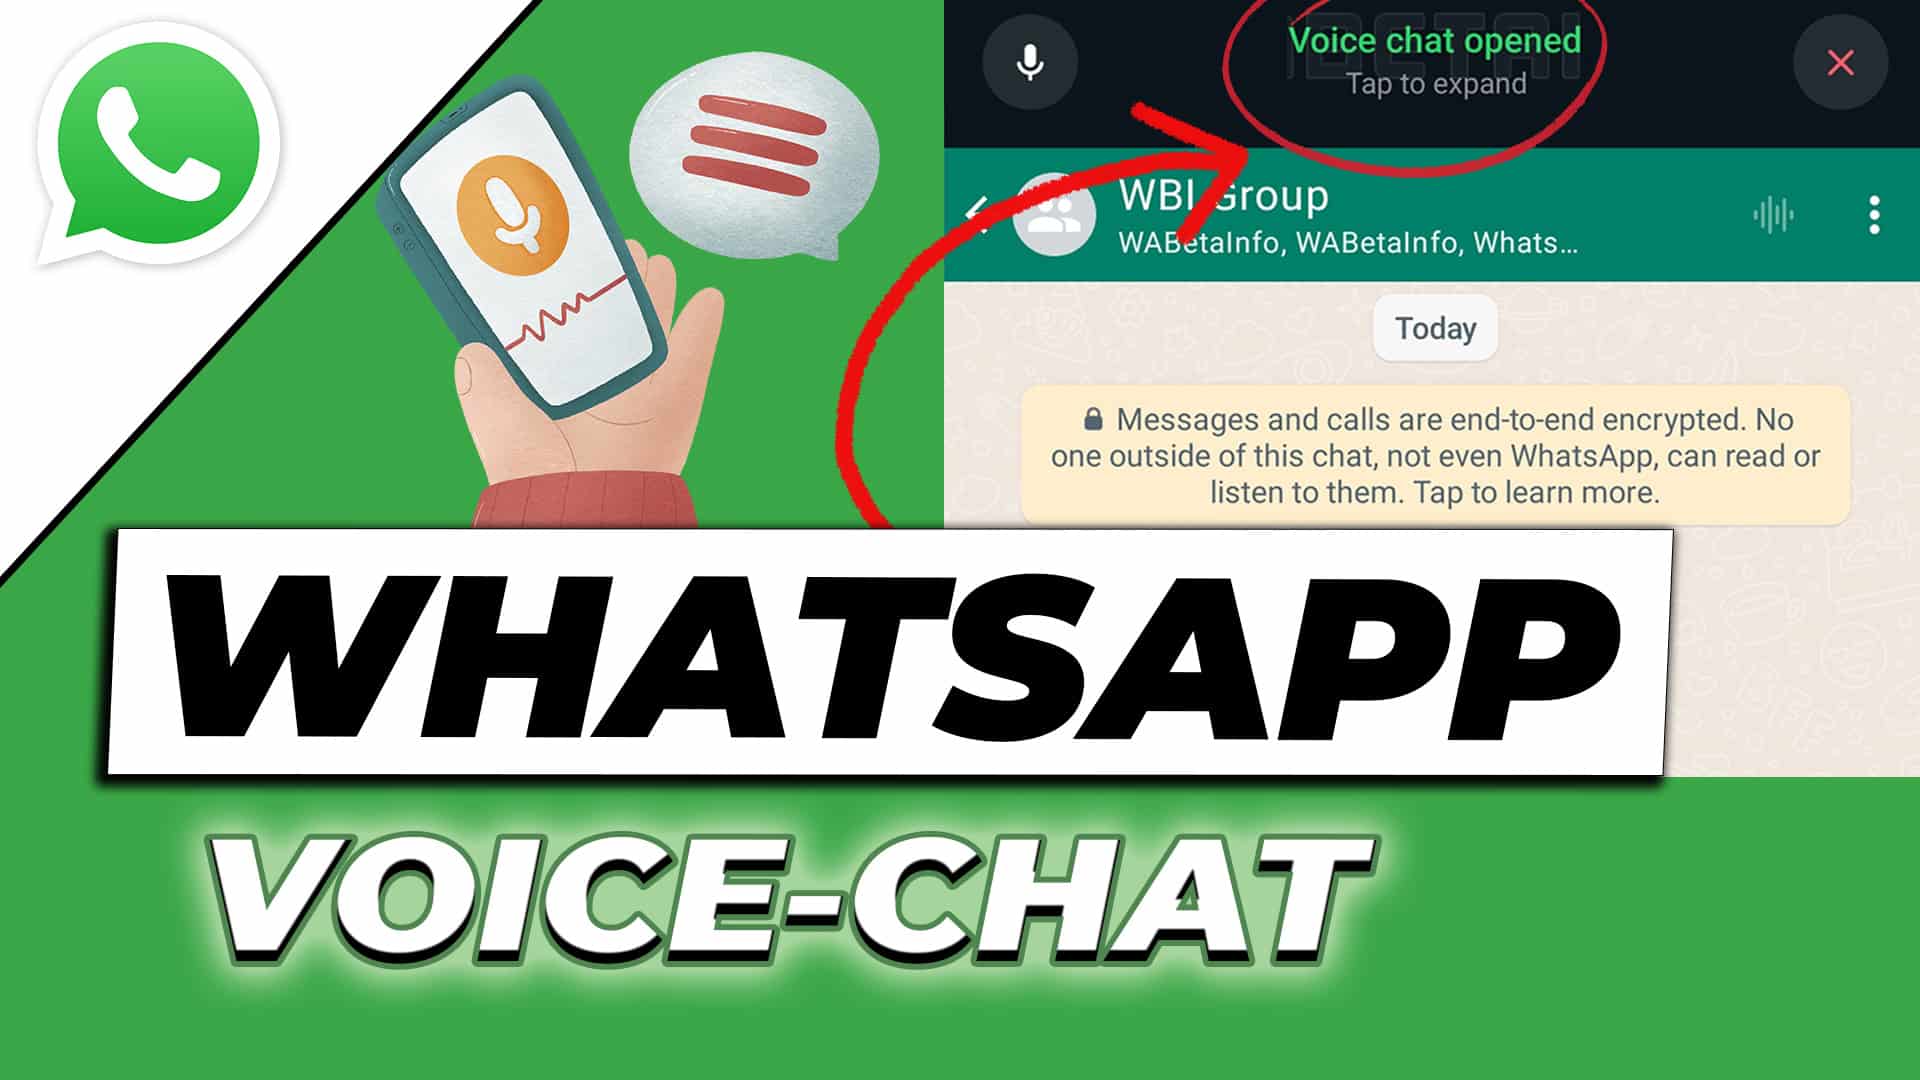 WhatsApp voice chat in groups – the new function